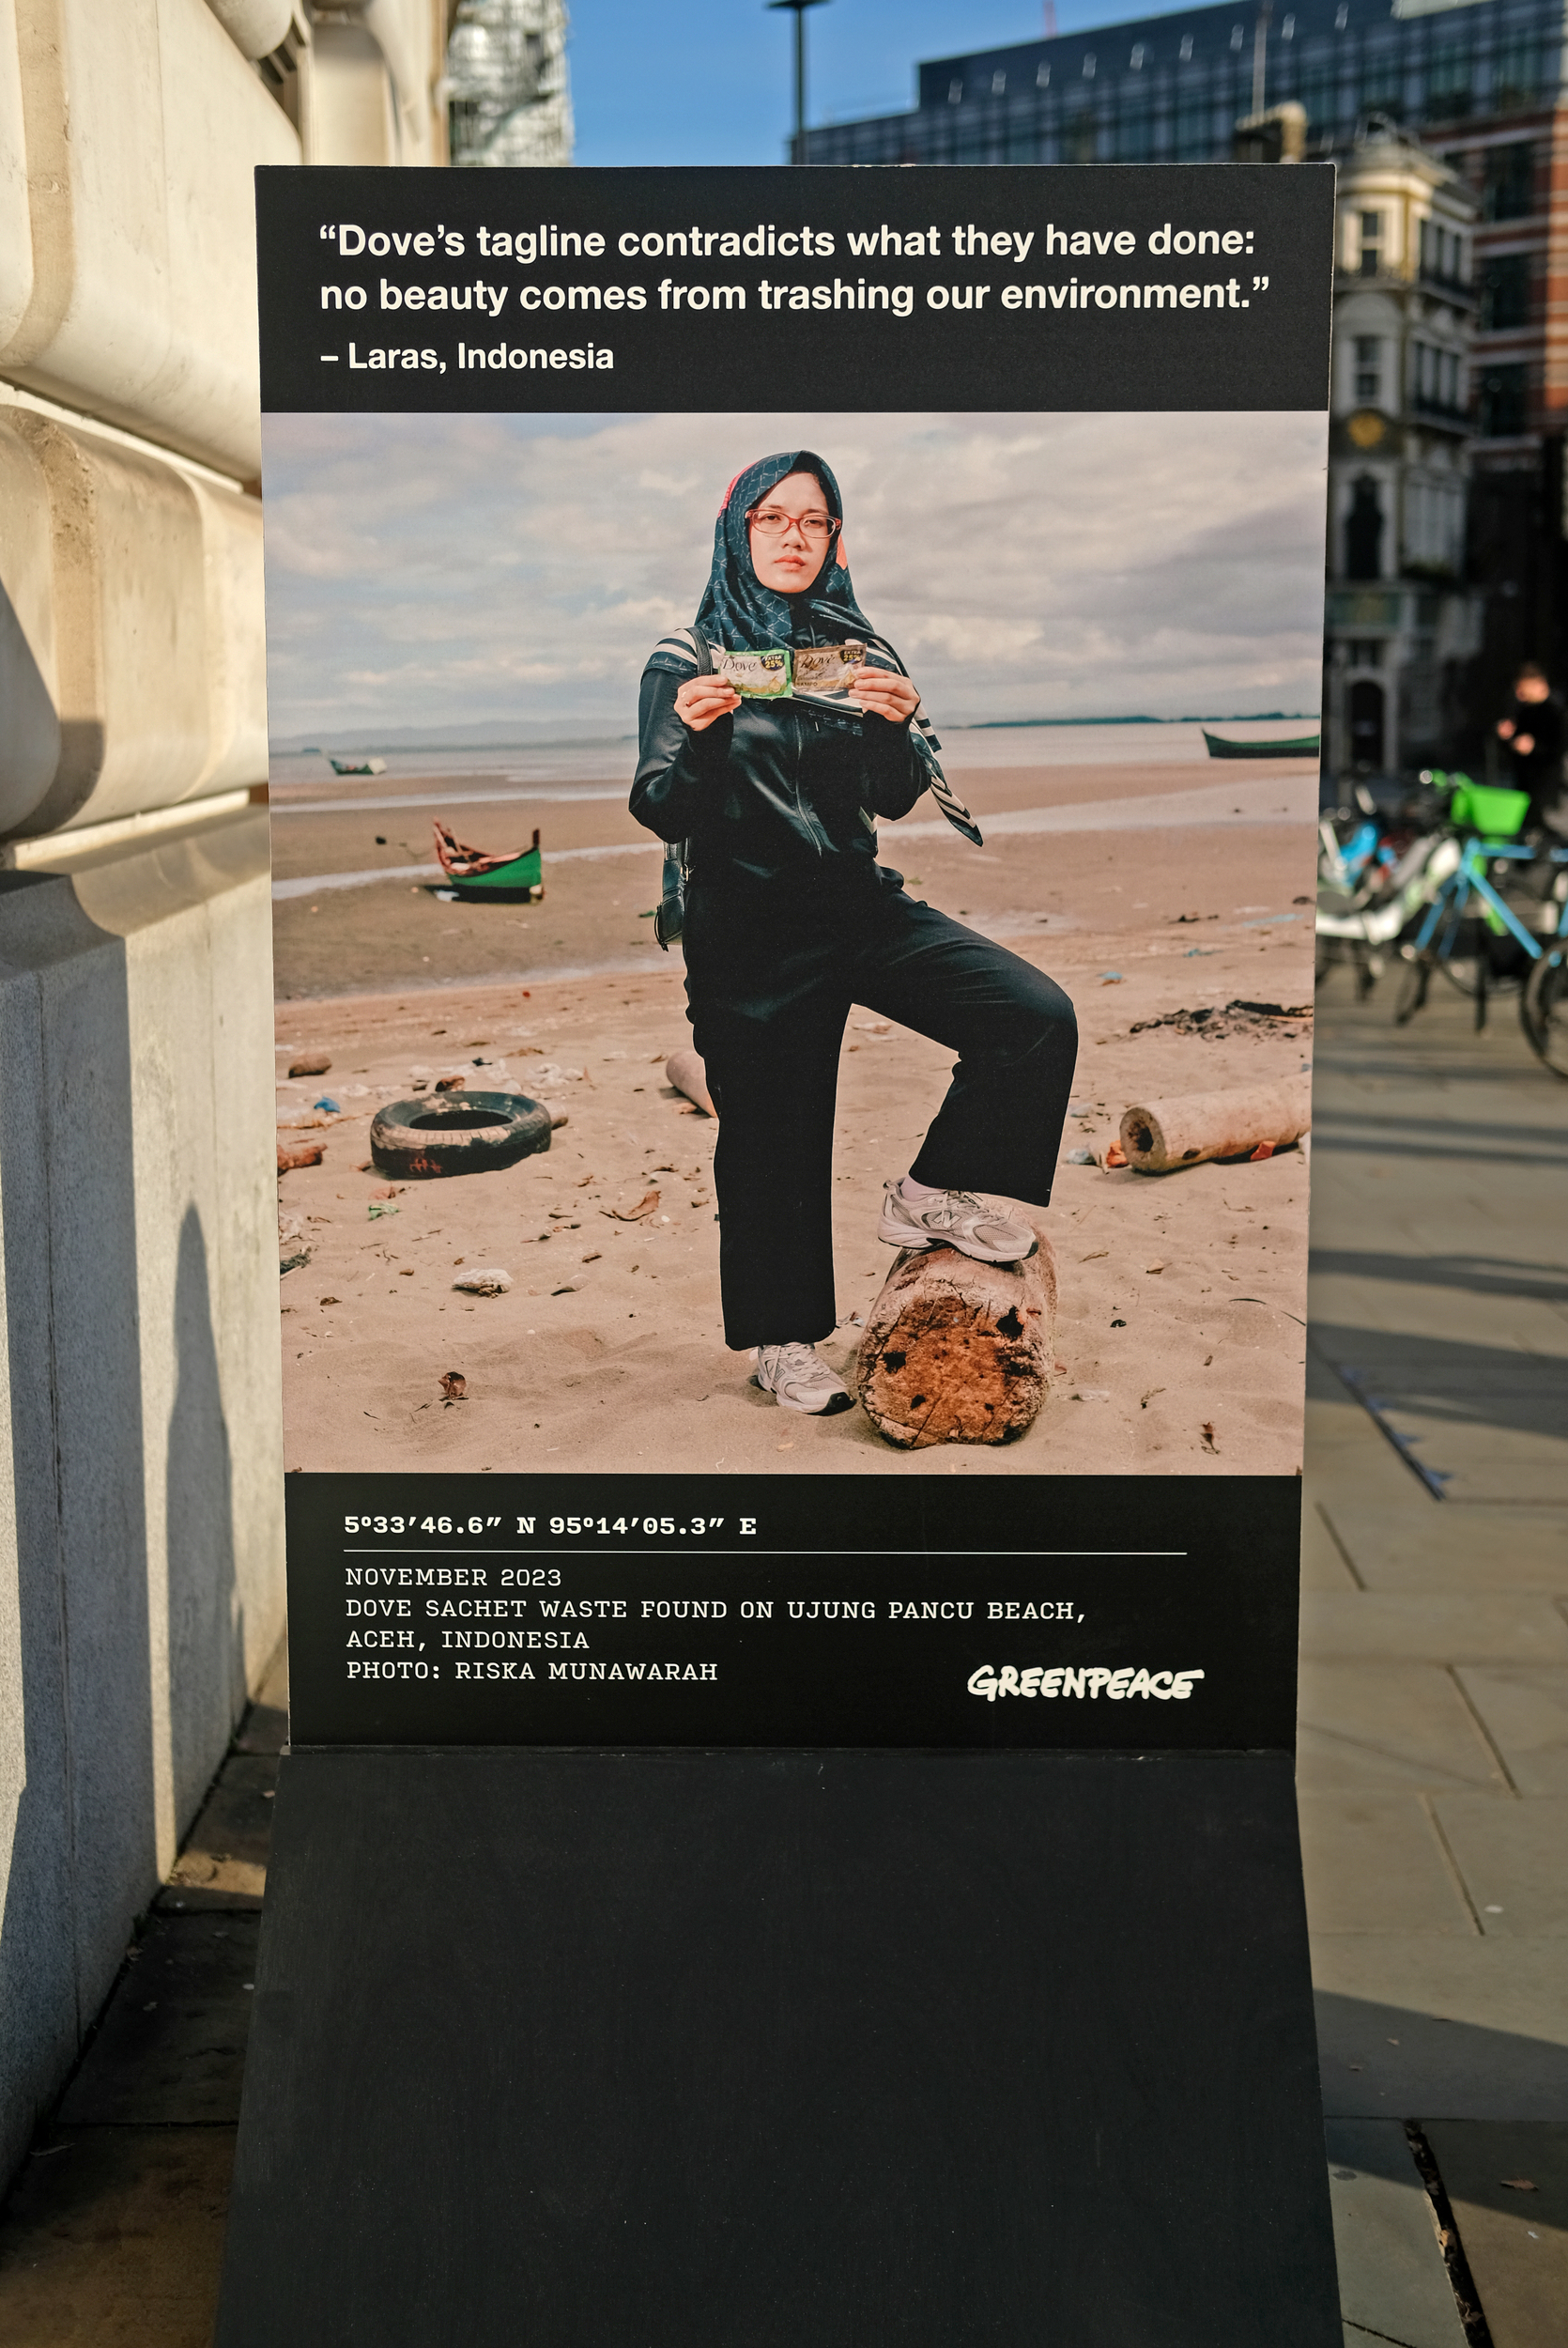 A standup sign in the street showing a woman on a beach holding up a littered Dove sachet. Quote reads "Dove's tagline contradicts what they have done: no beauty comes from trashing our environment."